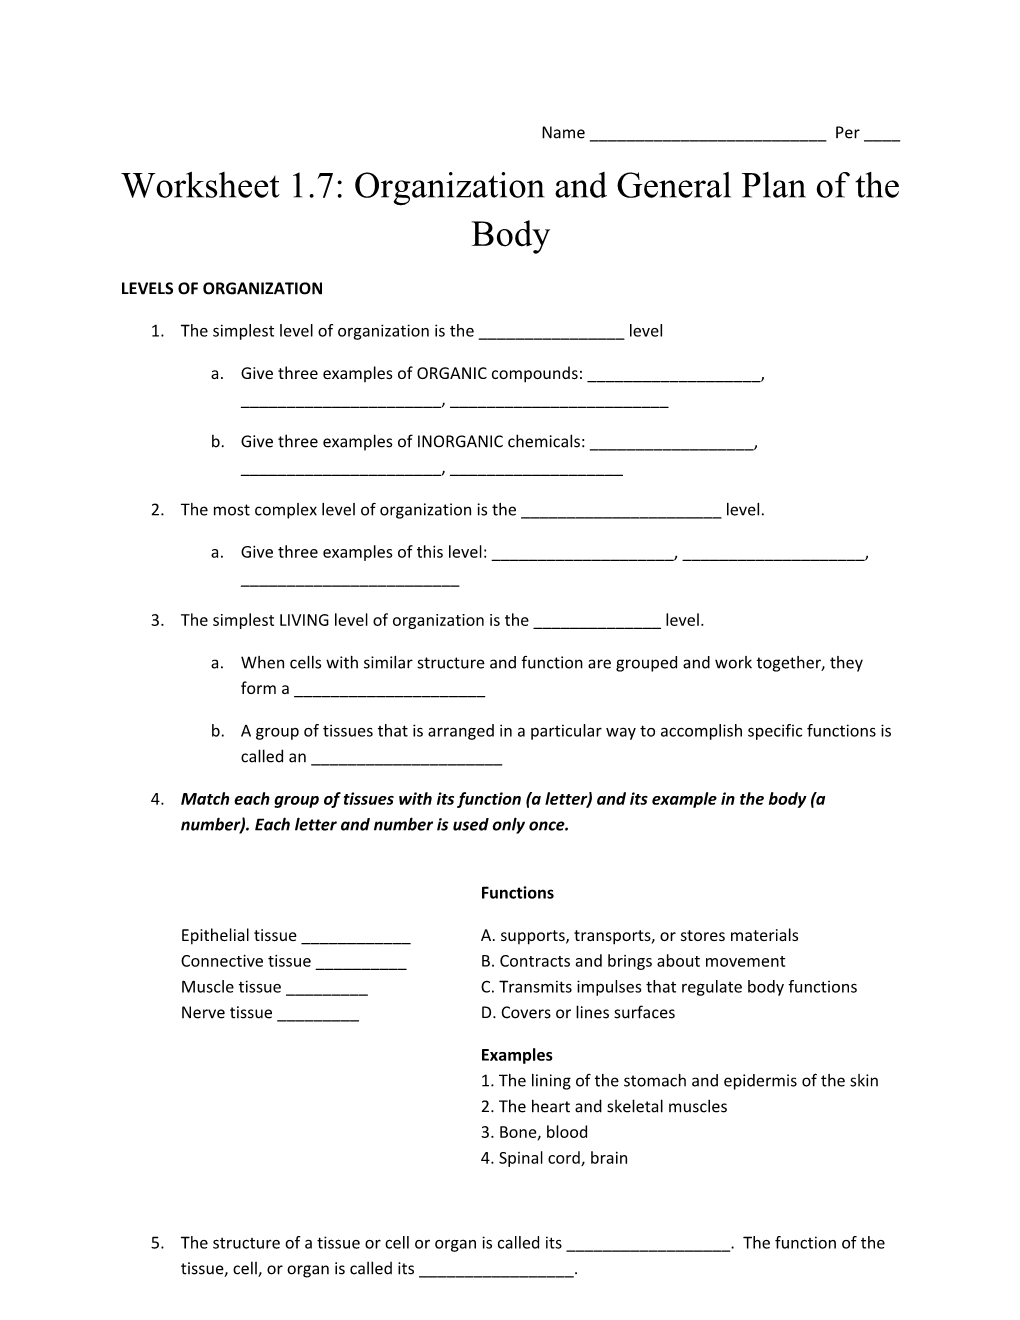 Worksheet 1.7: Organization and General Plan of the Body